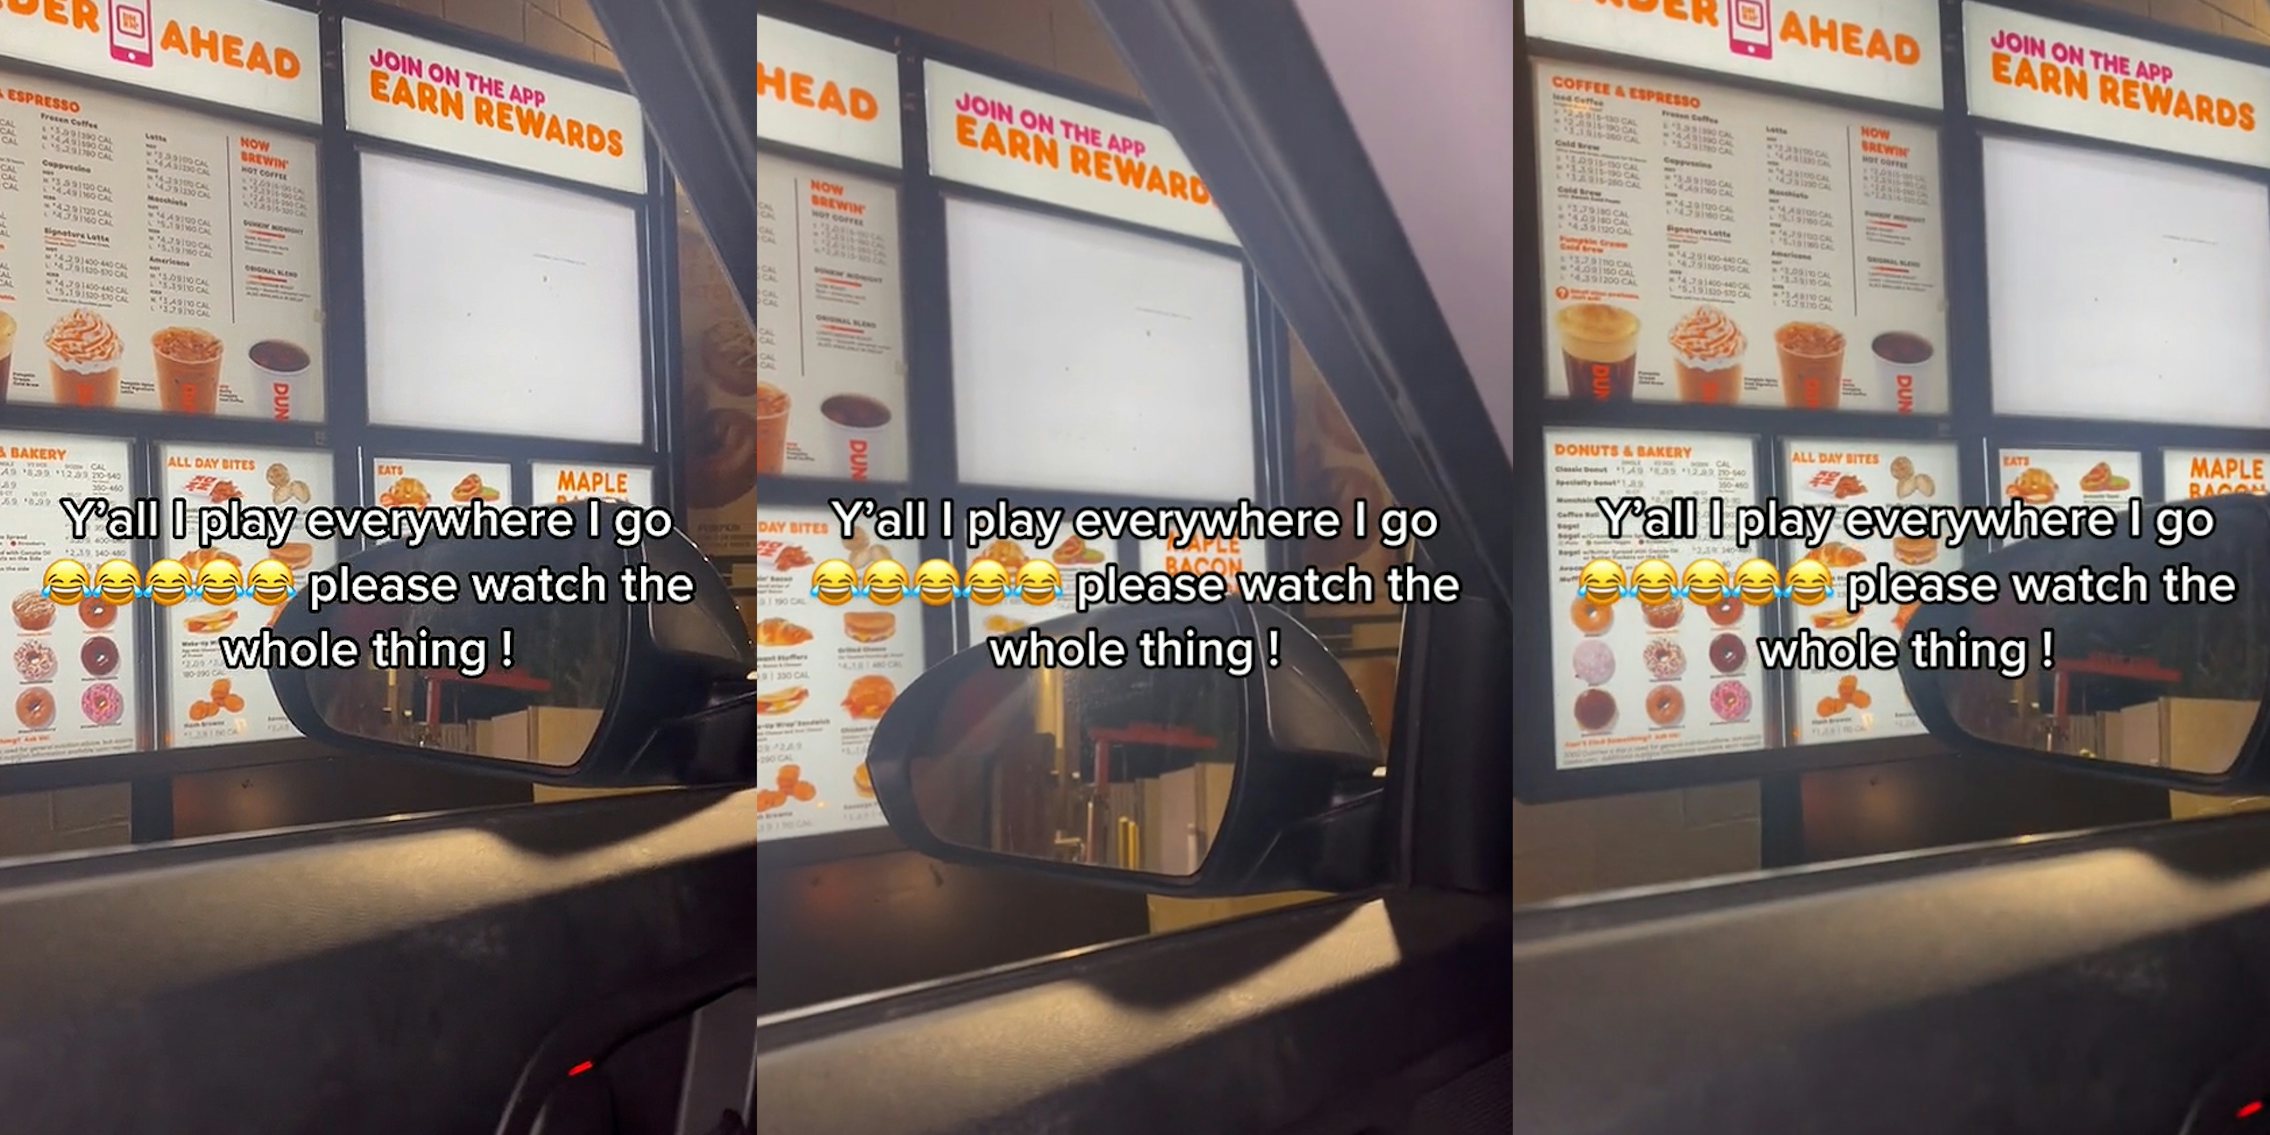 Dunkin' drive thru menu from driver's side window caption 'Y'all I play everywhere I go please watch the whole thing !' (l) Dunkin' drive thru menu from driver's side window caption 'Y'all I play everywhere I go please watch the whole thing !' (c) Dunkin' drive thru menu from driver's side window caption 'Y'all I play everywhere I go please watch the whole thing !' (r)